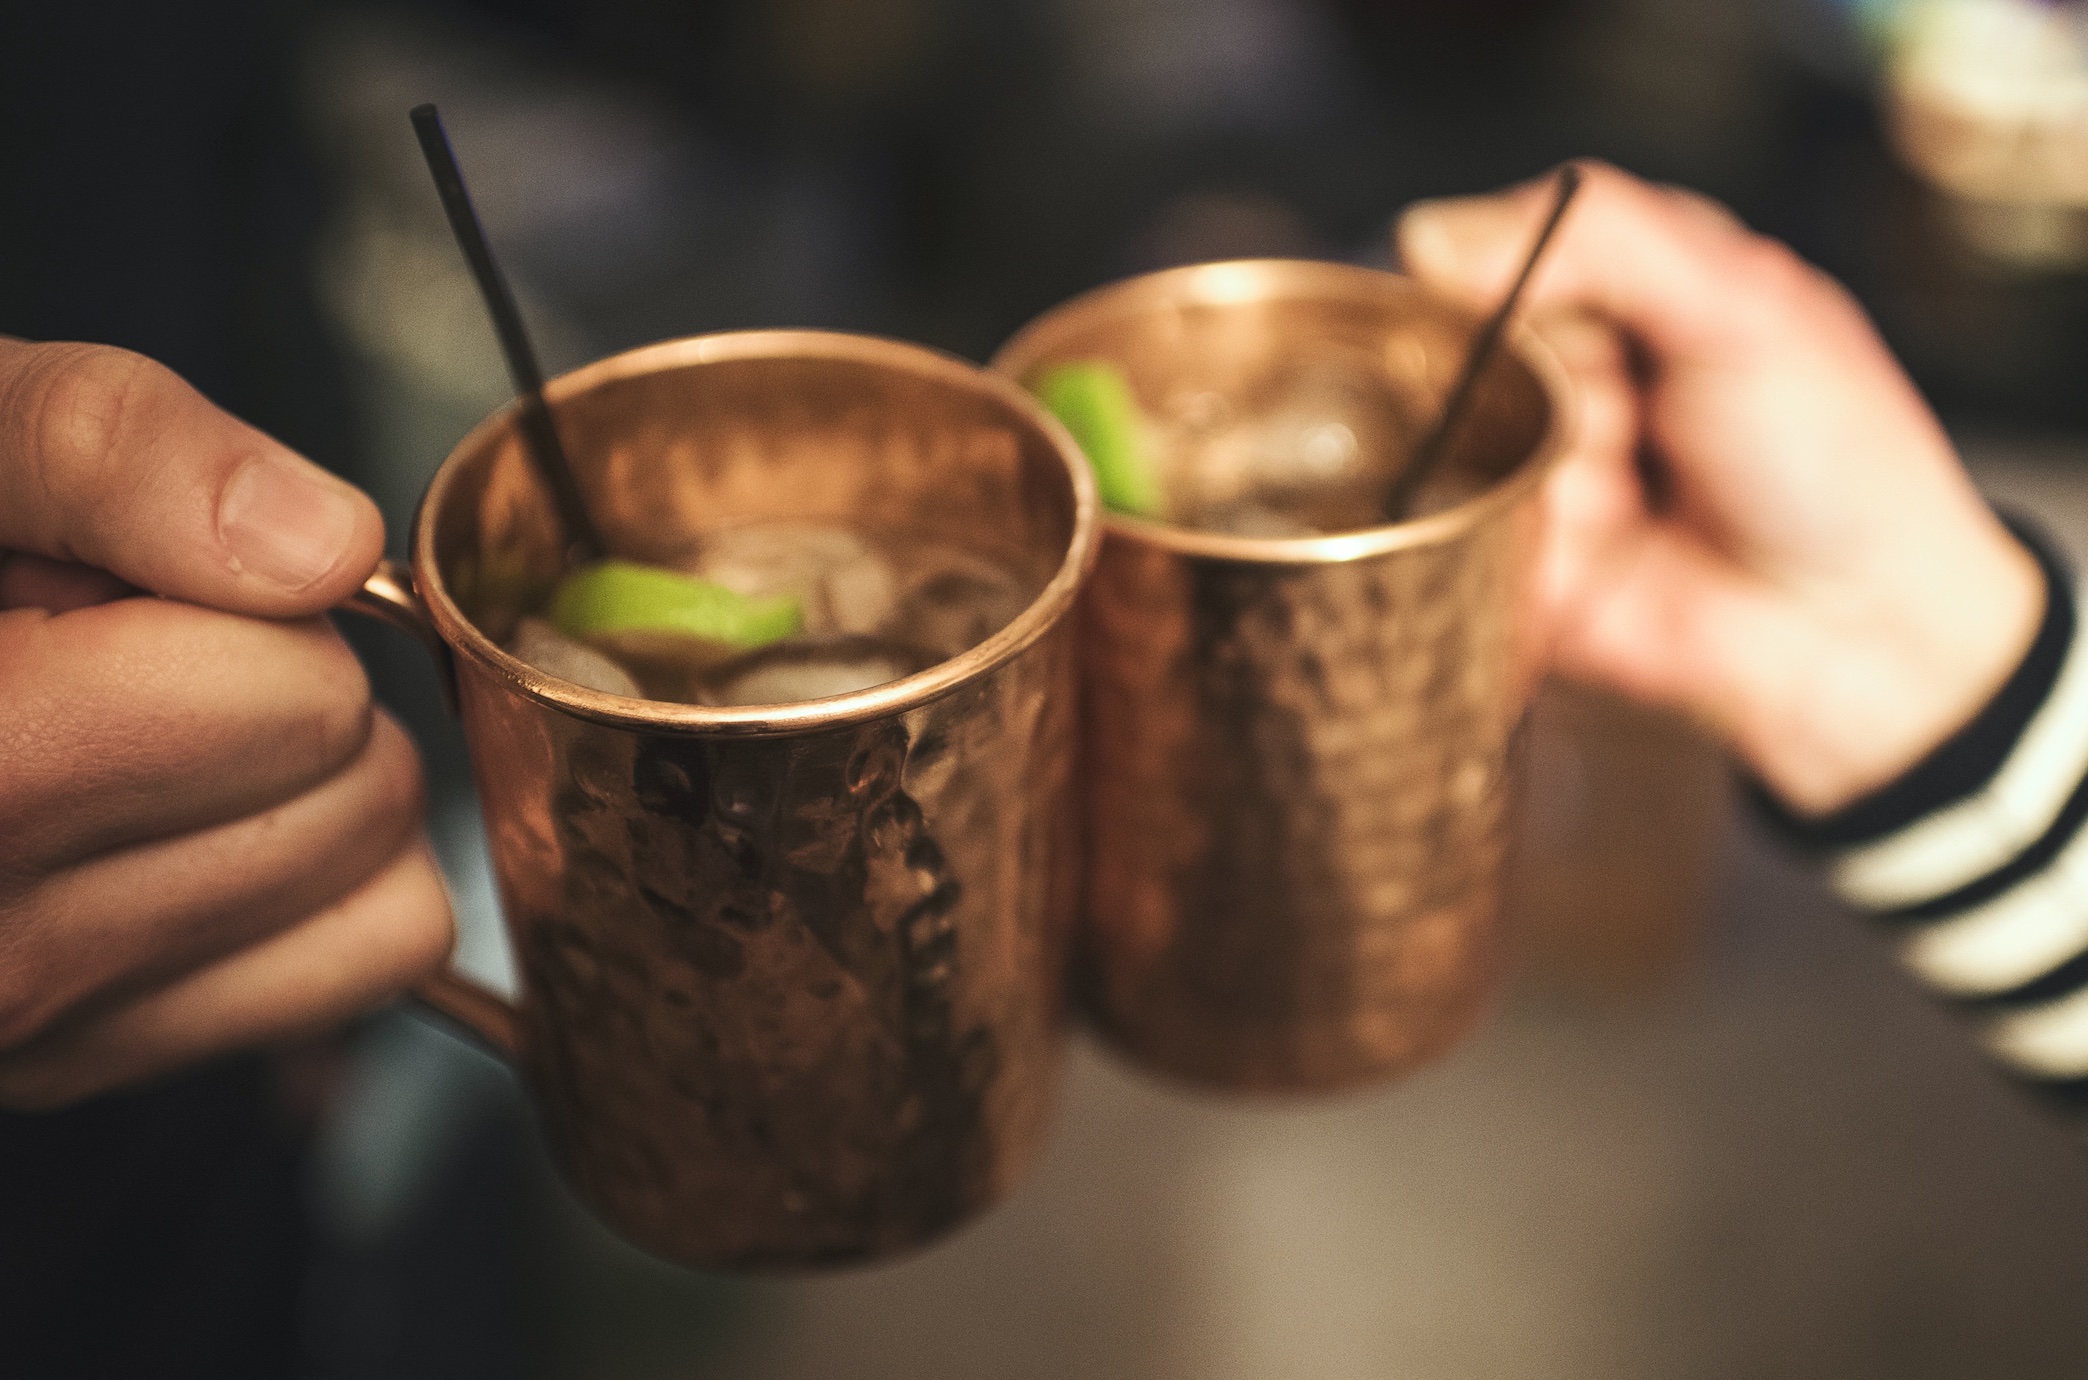 Two people toasting with Moscow Mules; image by Gary Meulemans, via Unsplash.com.